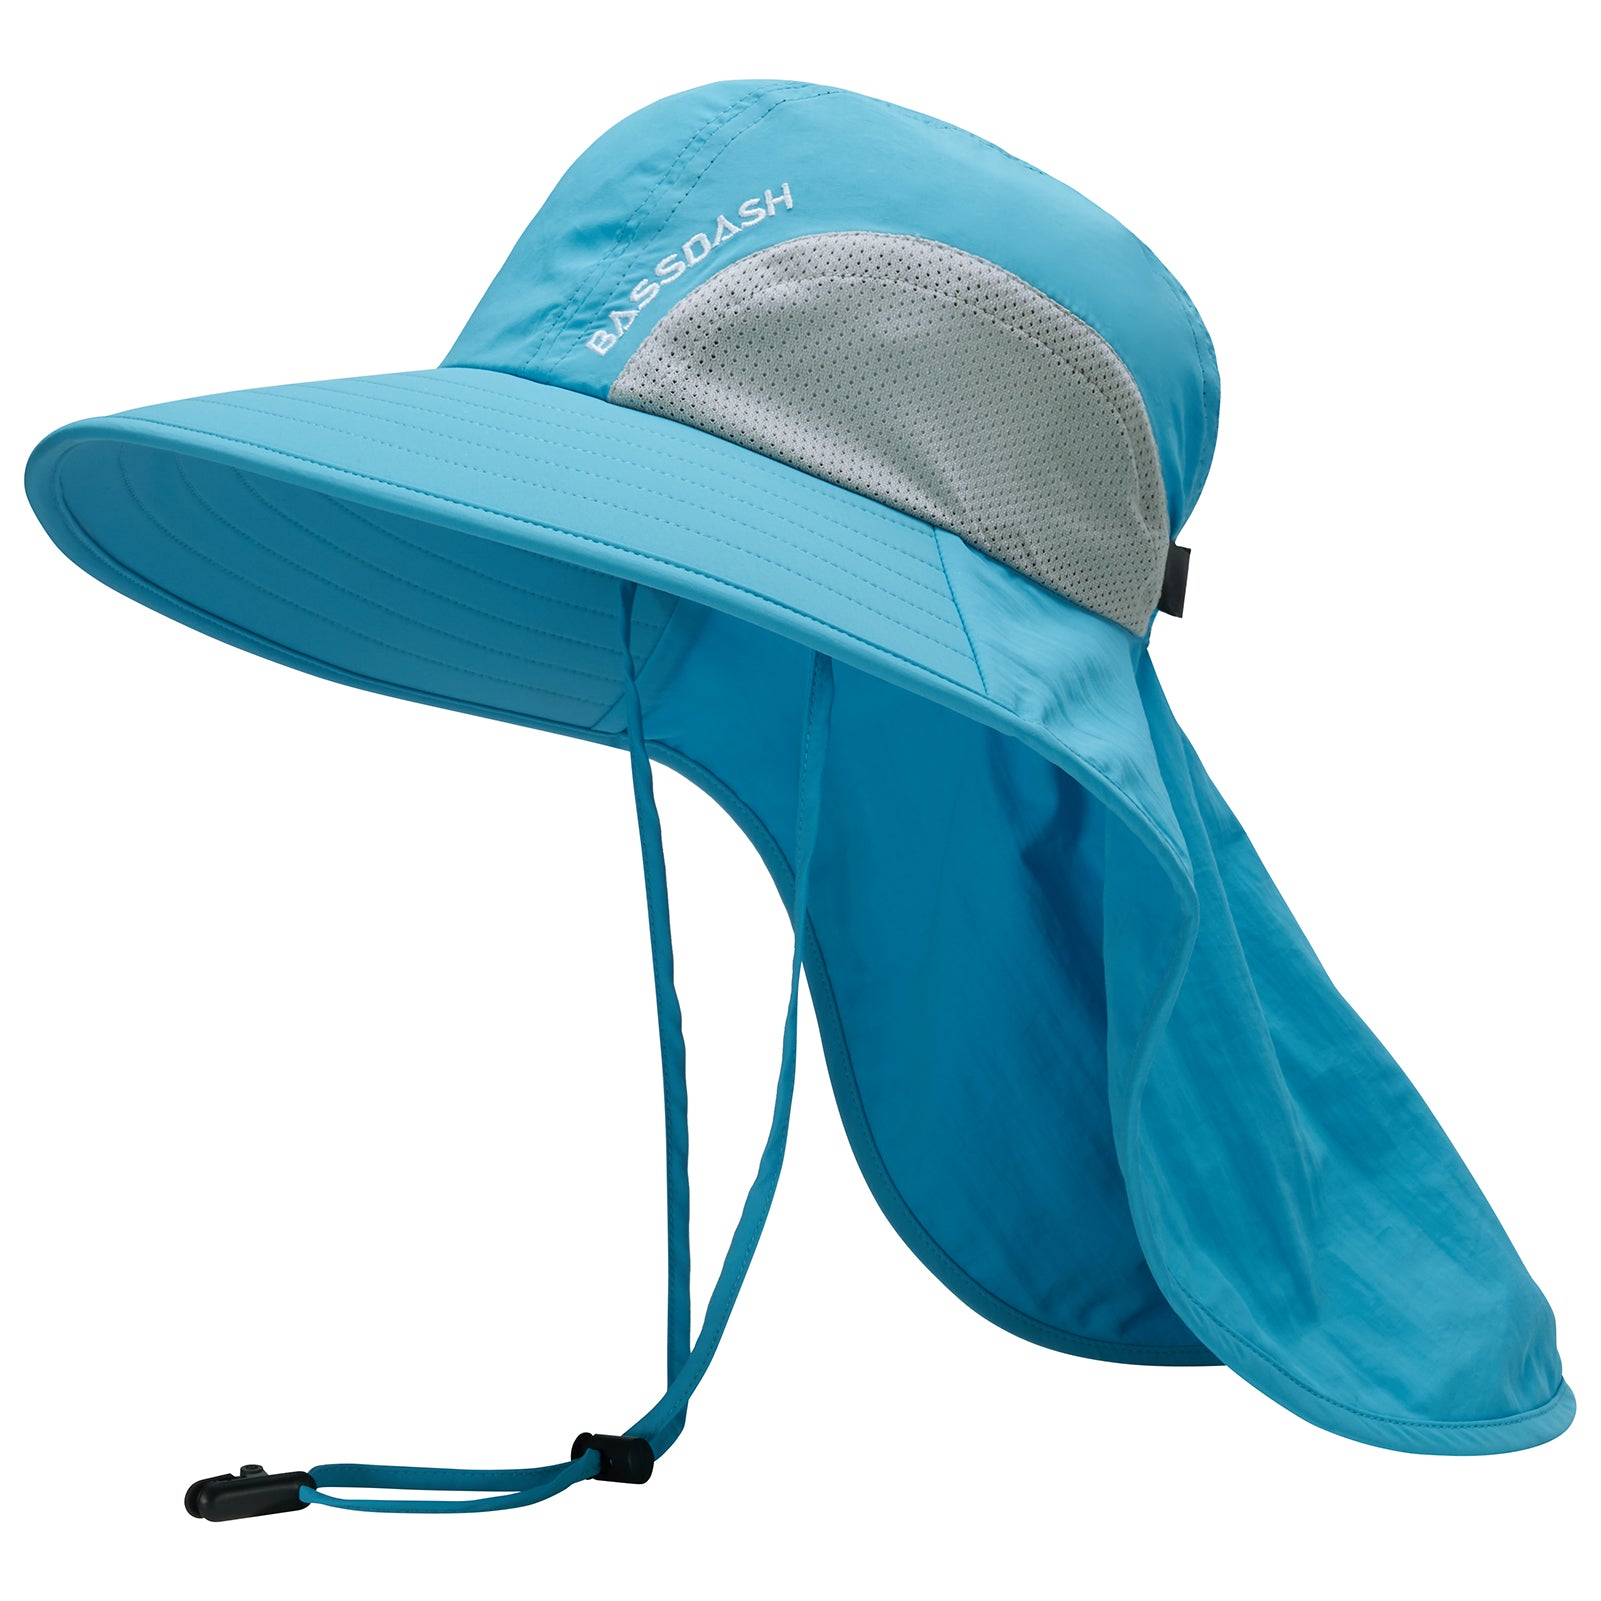 Bassdash Foldable UPF 50+ Fishing Hats with Removable Neck Flap FH12, Dark Blue with Foldable Brim / One Size